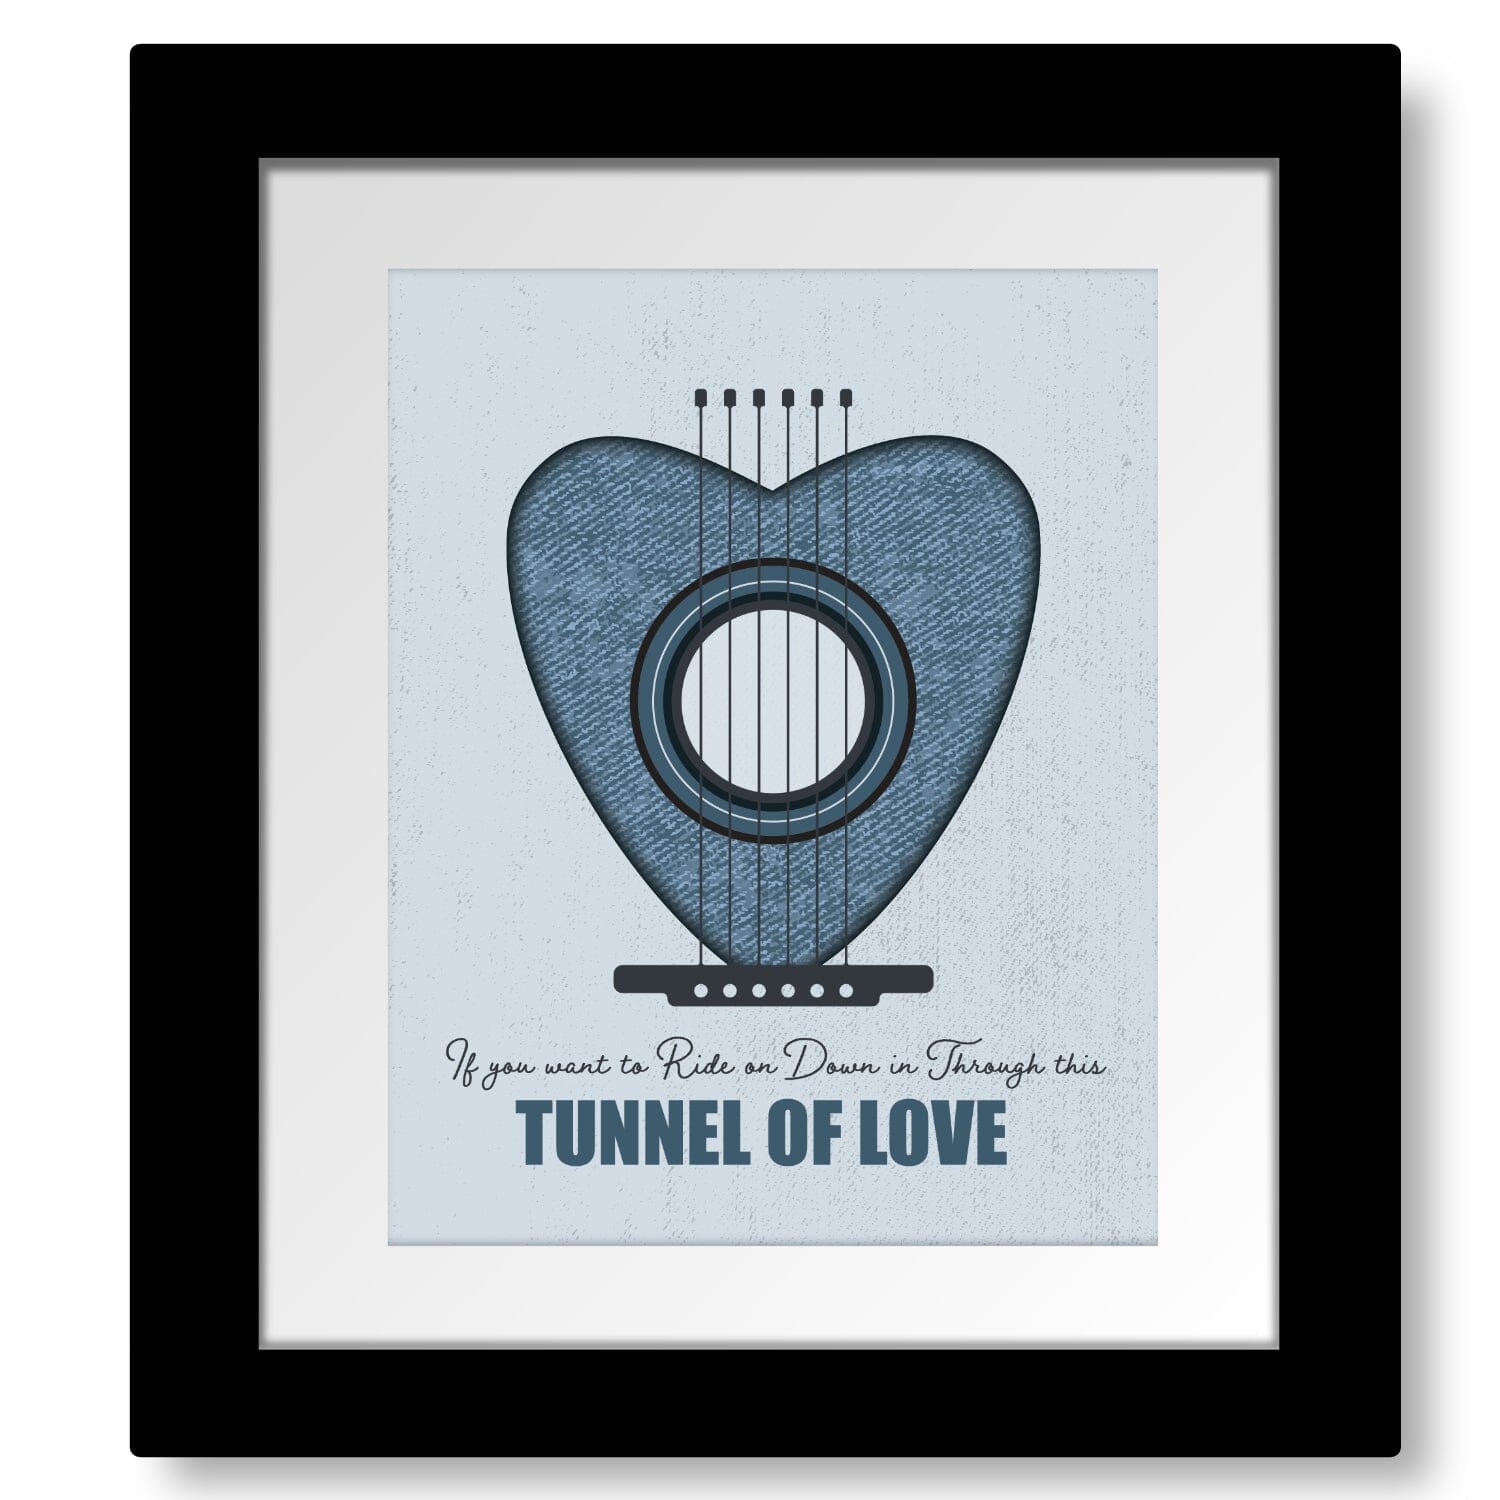 Tunnel of Love by Bruce Springsteen - Lyric Rock Music Art Song Lyrics Art Song Lyrics Art 8x10 White Matted Print 